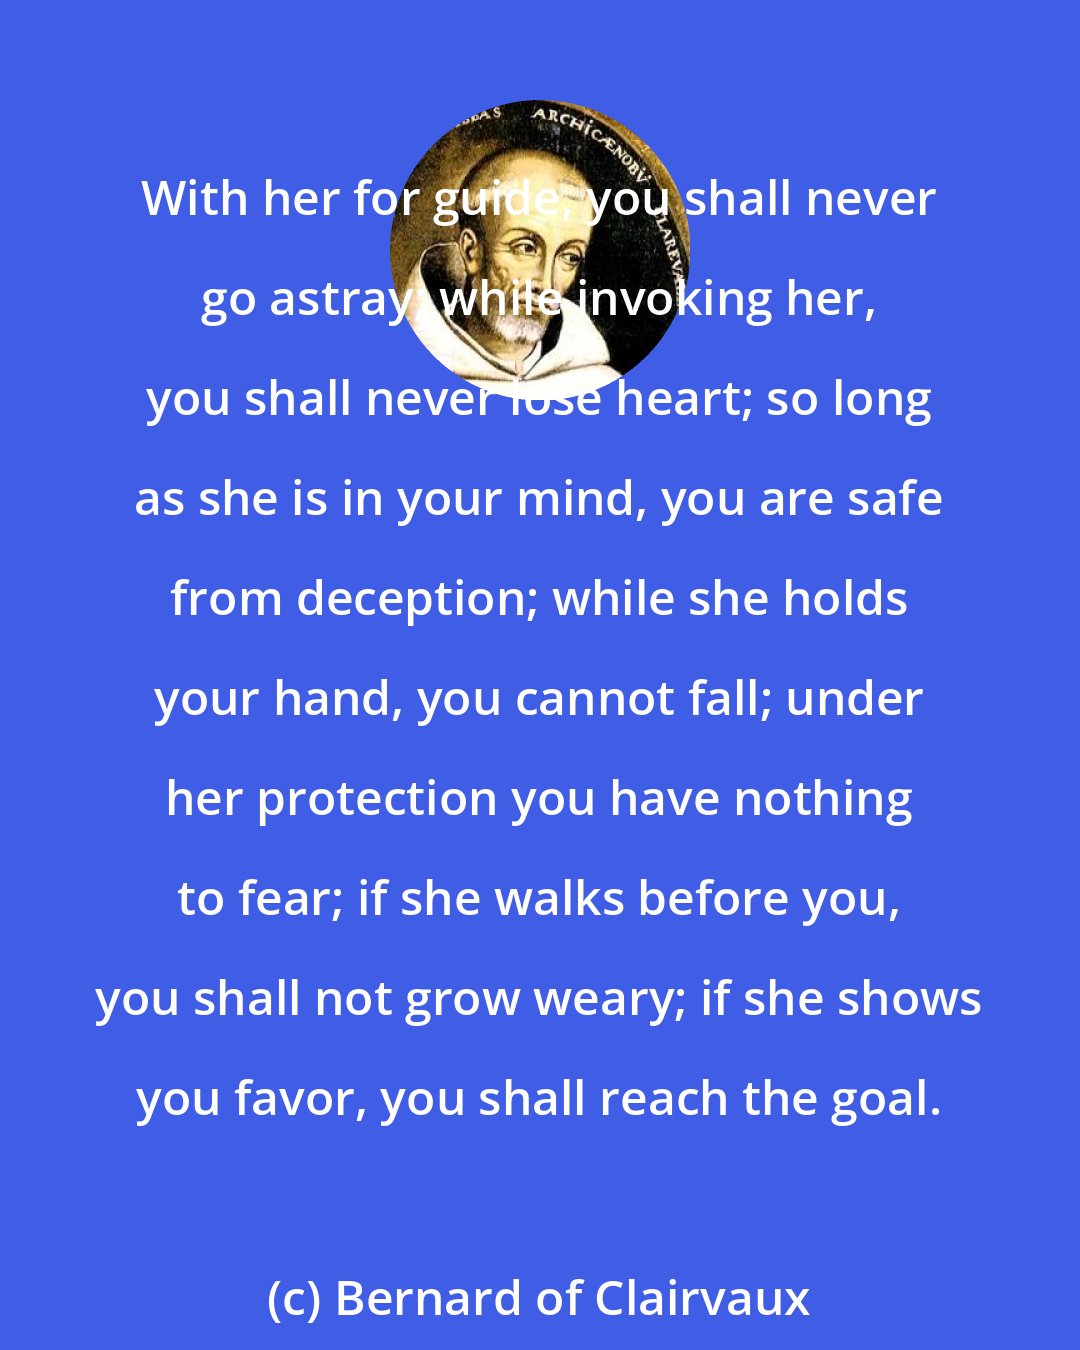 Bernard of Clairvaux: With her for guide, you shall never go astray; while invoking her, you shall never lose heart; so long as she is in your mind, you are safe from deception; while she holds your hand, you cannot fall; under her protection you have nothing to fear; if she walks before you, you shall not grow weary; if she shows you favor, you shall reach the goal.